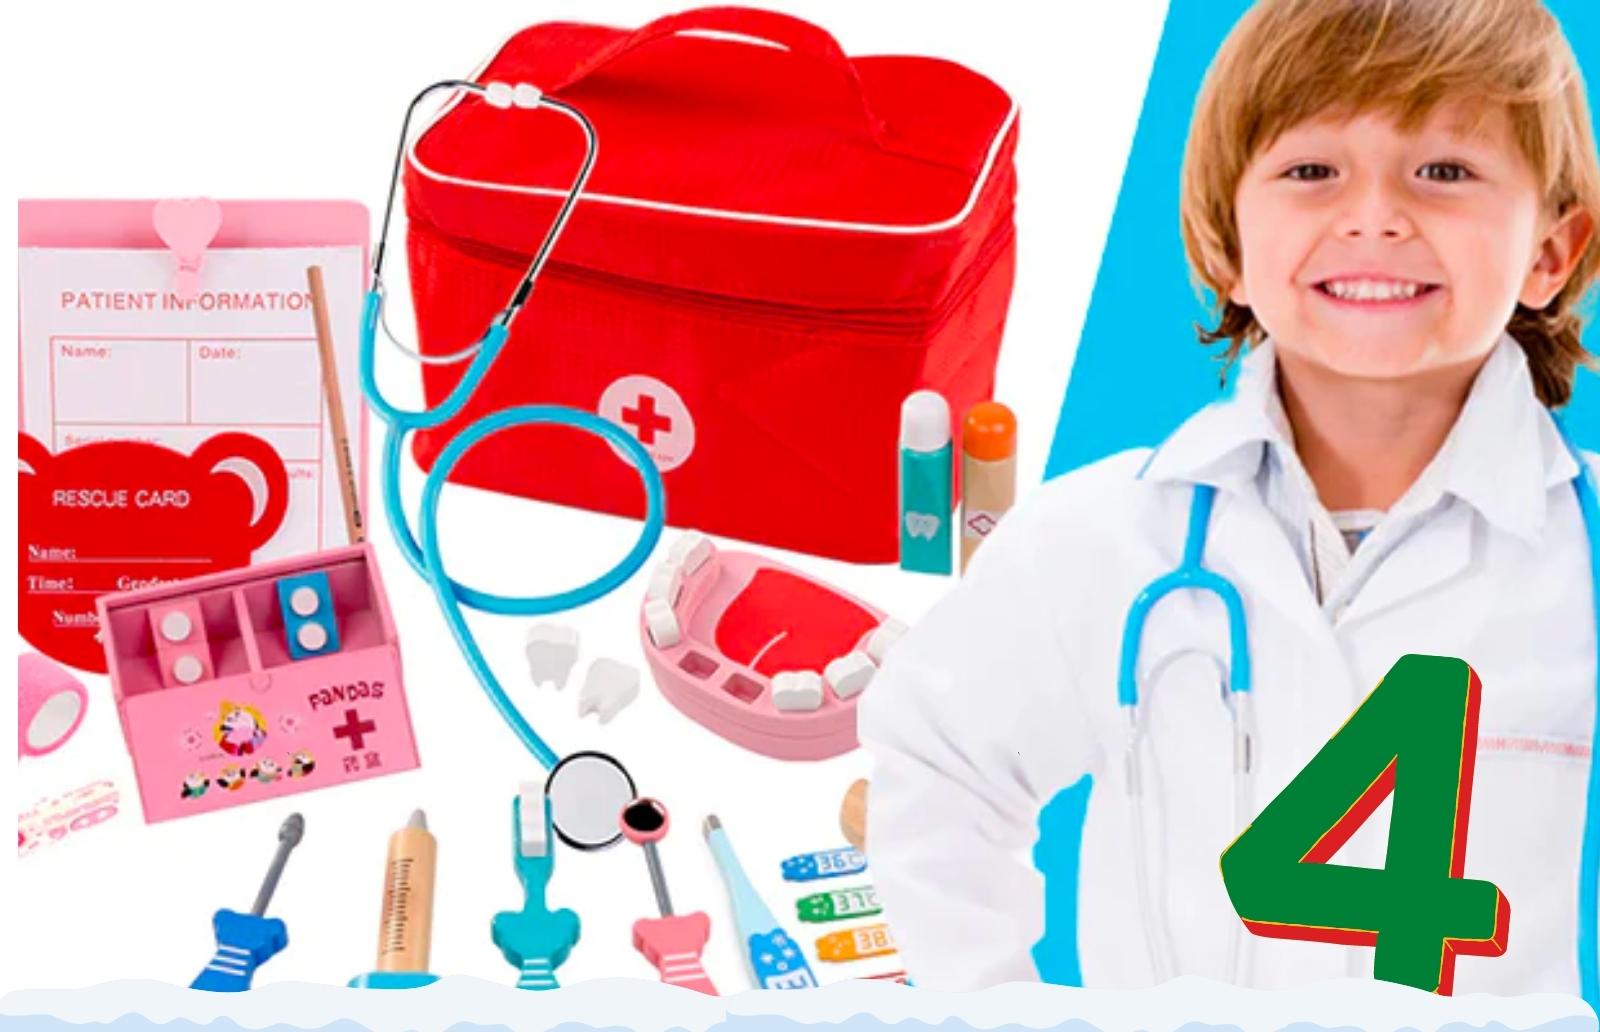 a-little-boy-with-his-doctor-kit-toy